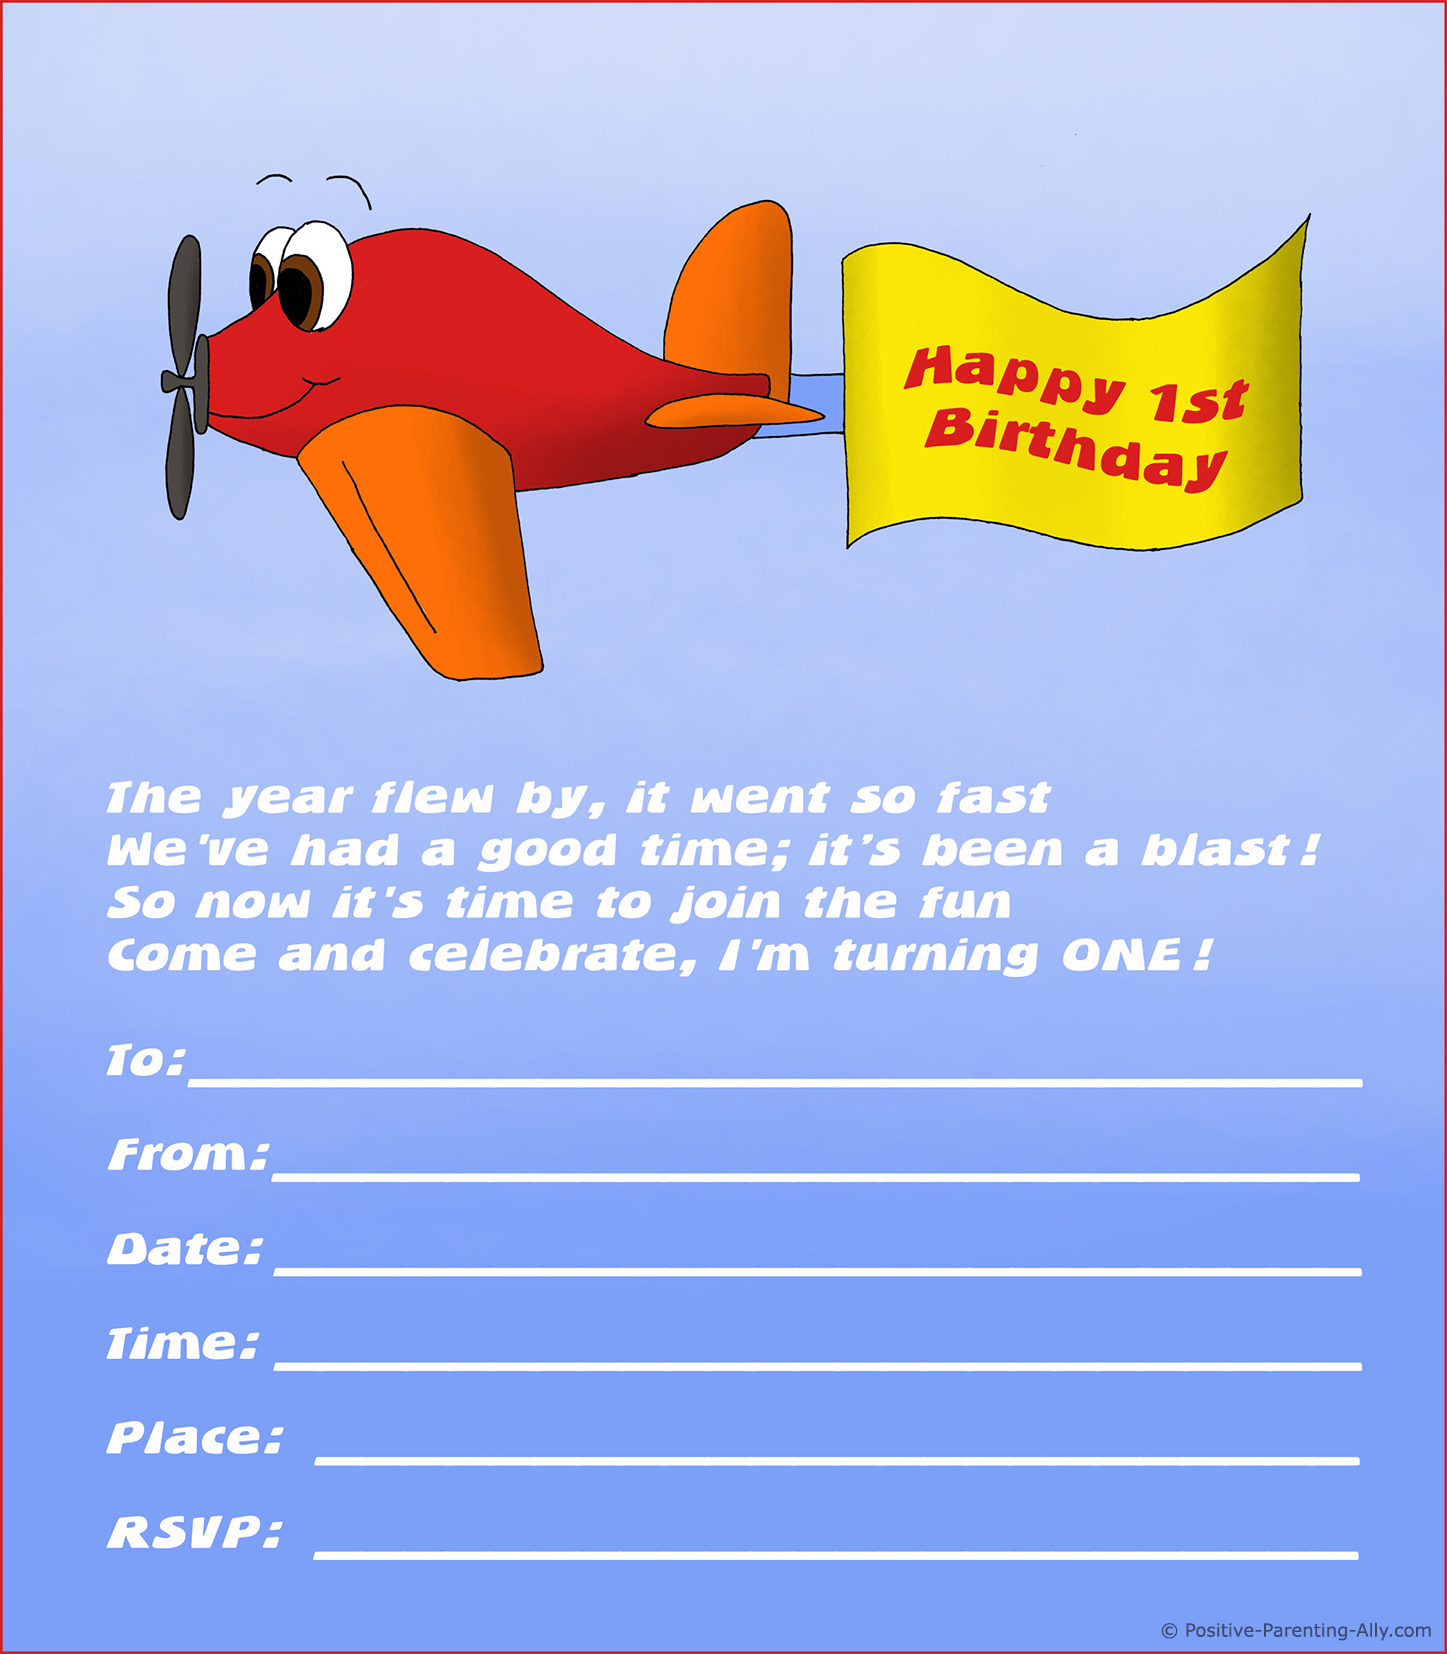 Red plane with flag on 1 birthday invite - free and printable.